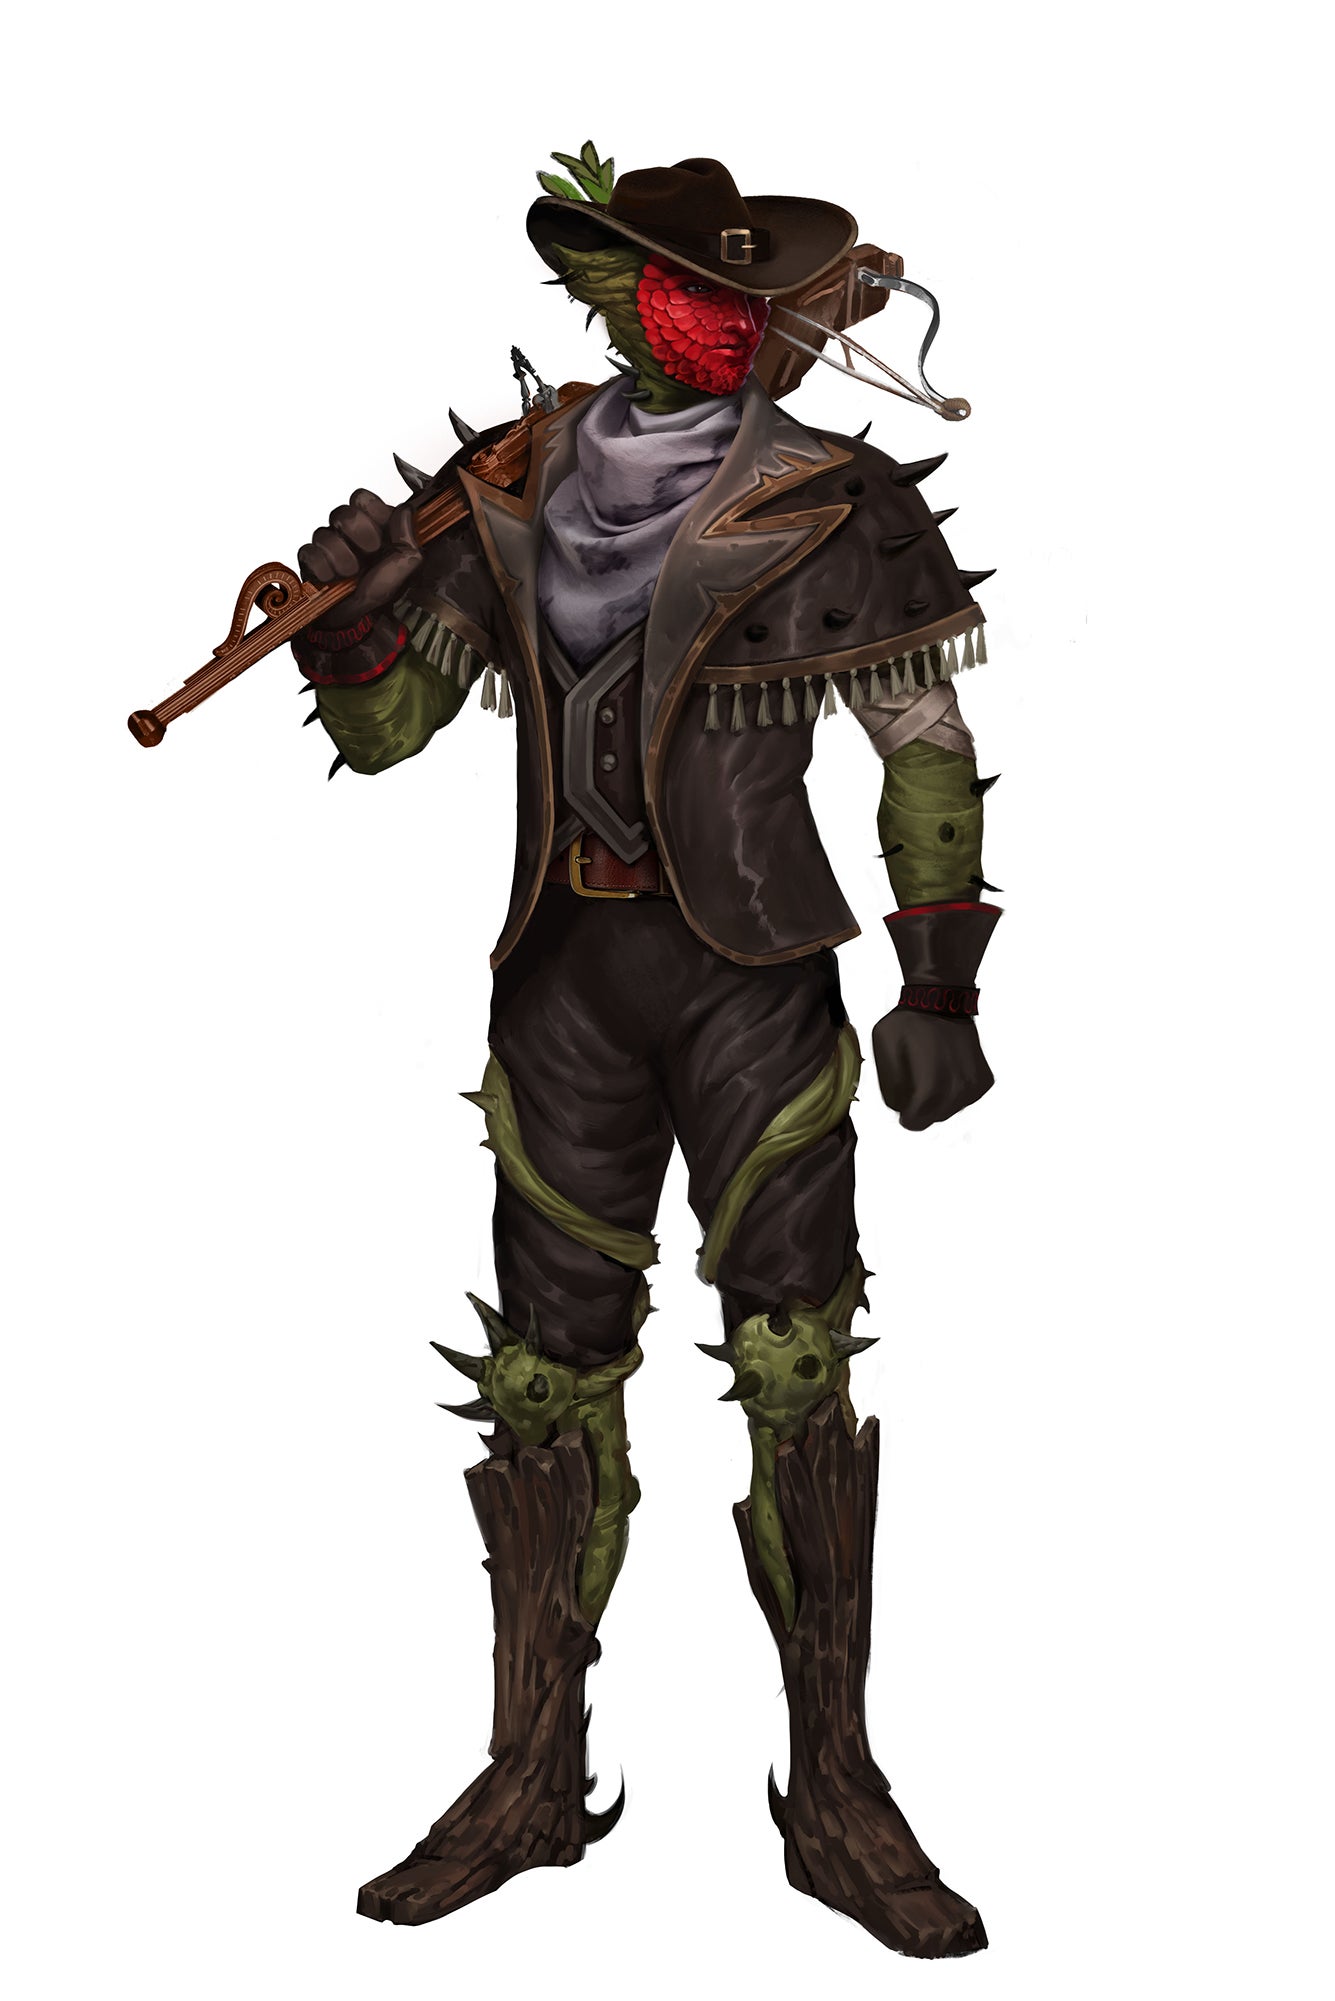 A ghoran with a red petaled face hefts a crossbow over their shoulder